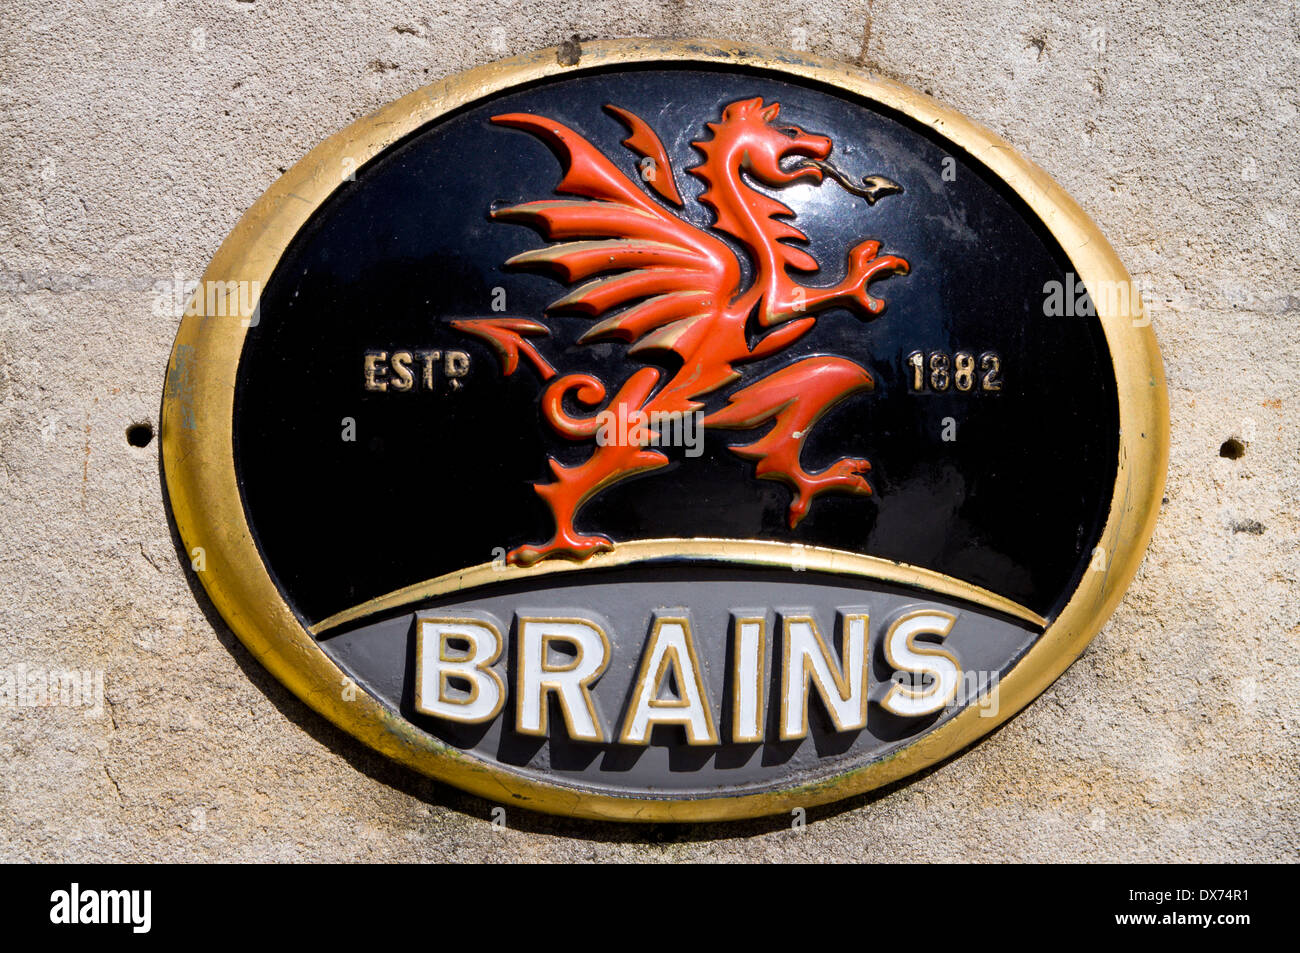 Brains Beer sign, Cardiff, Wales. Stock Photo